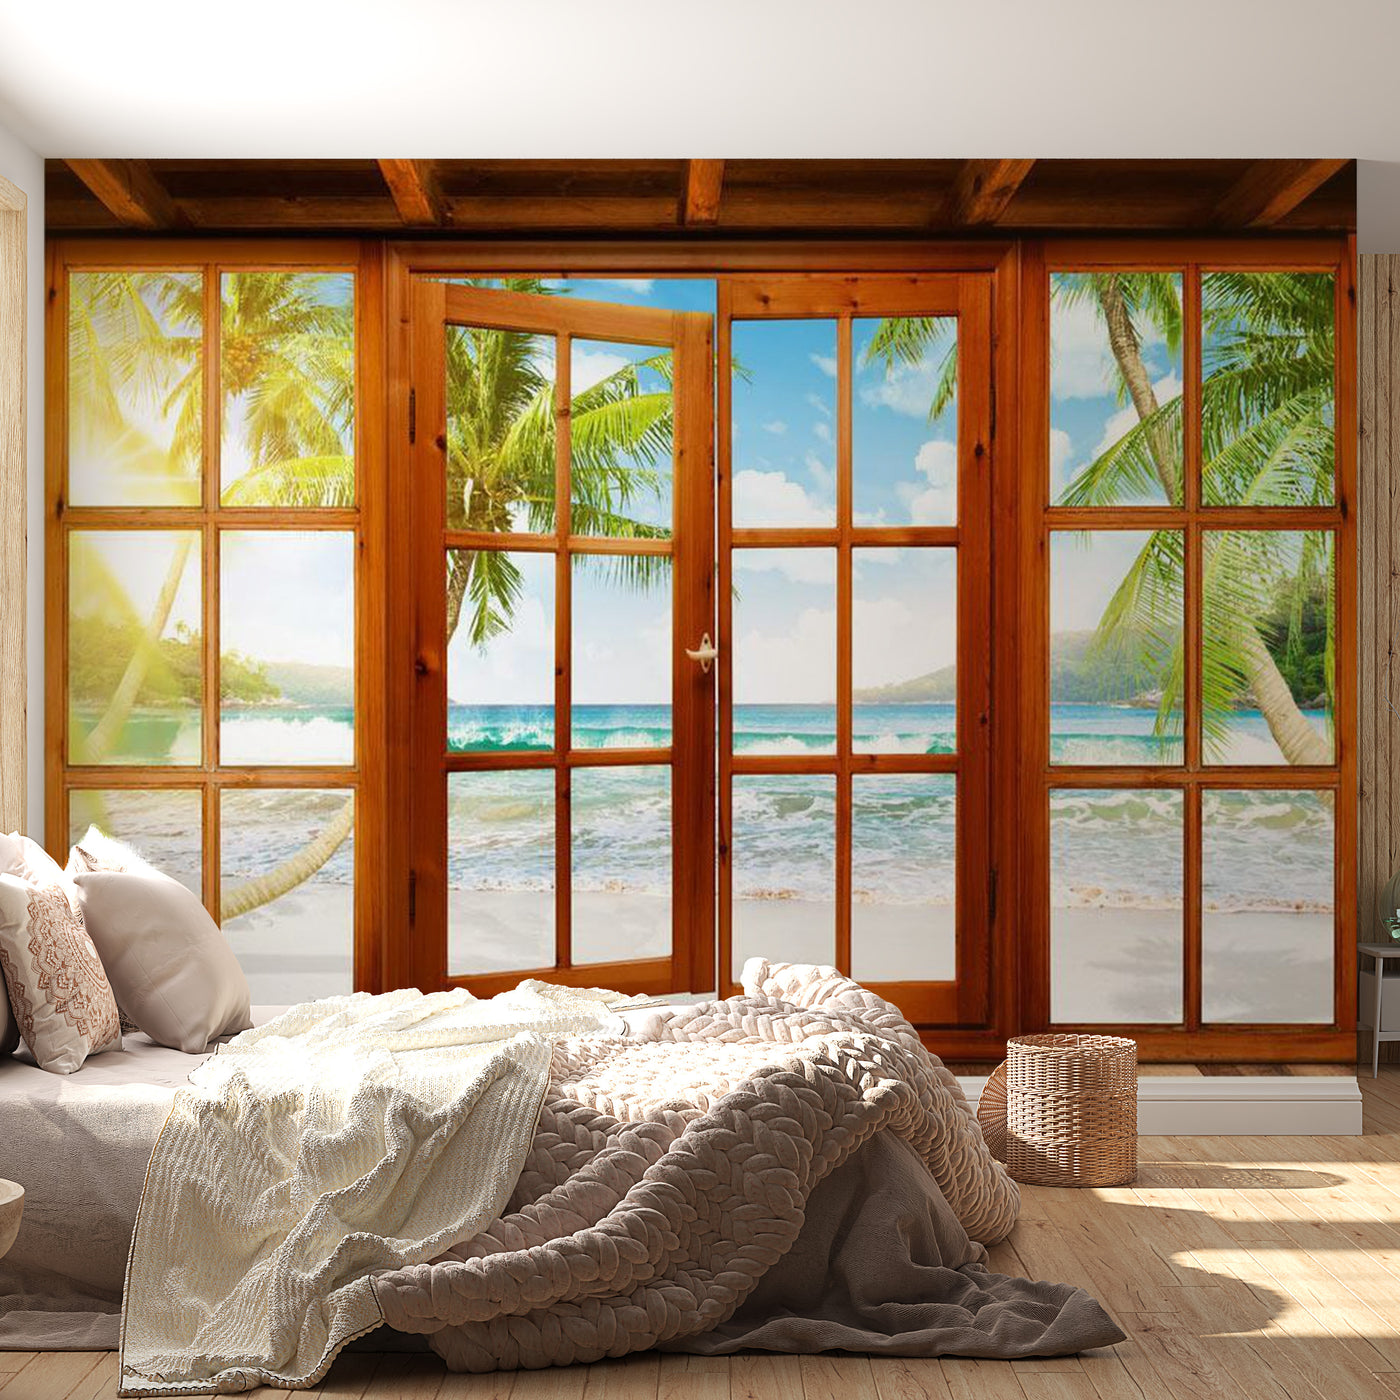 Peel & Stick Beach Wall Mural - Oceanfront View - Removable Wall Decals